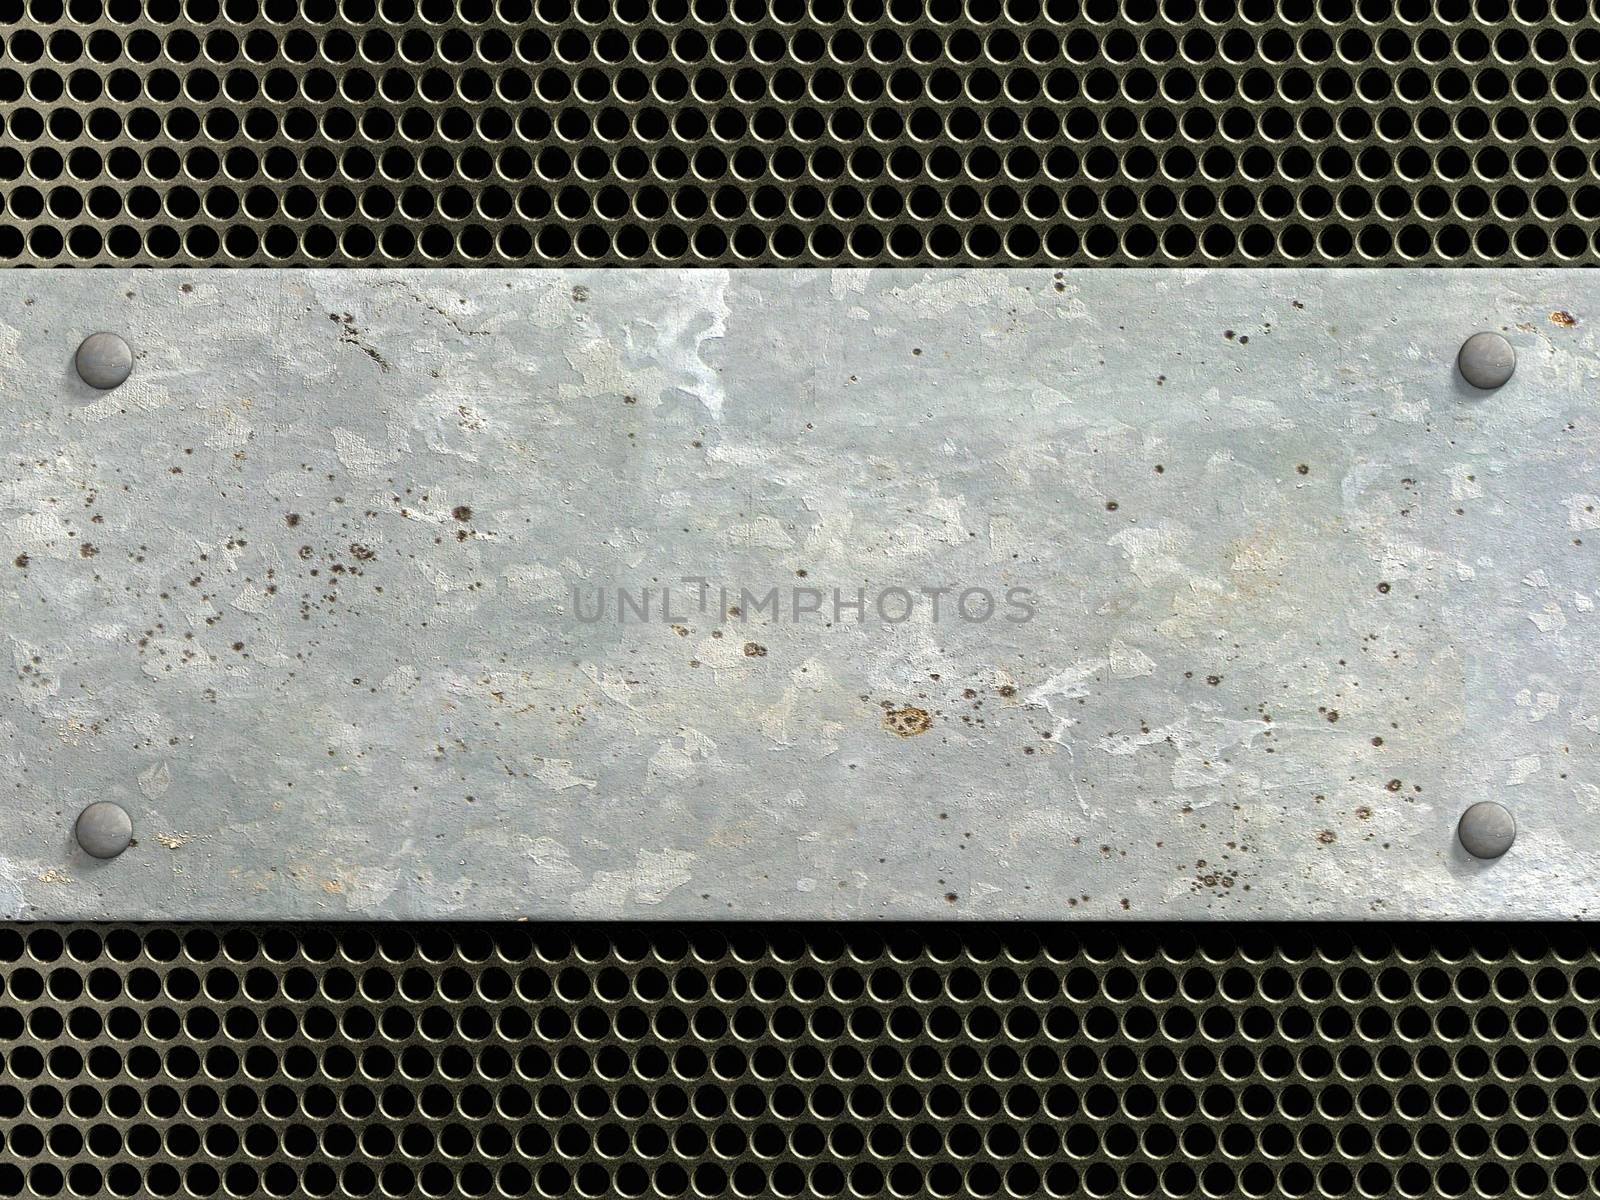 Metal texture with rivets background 3d illustration